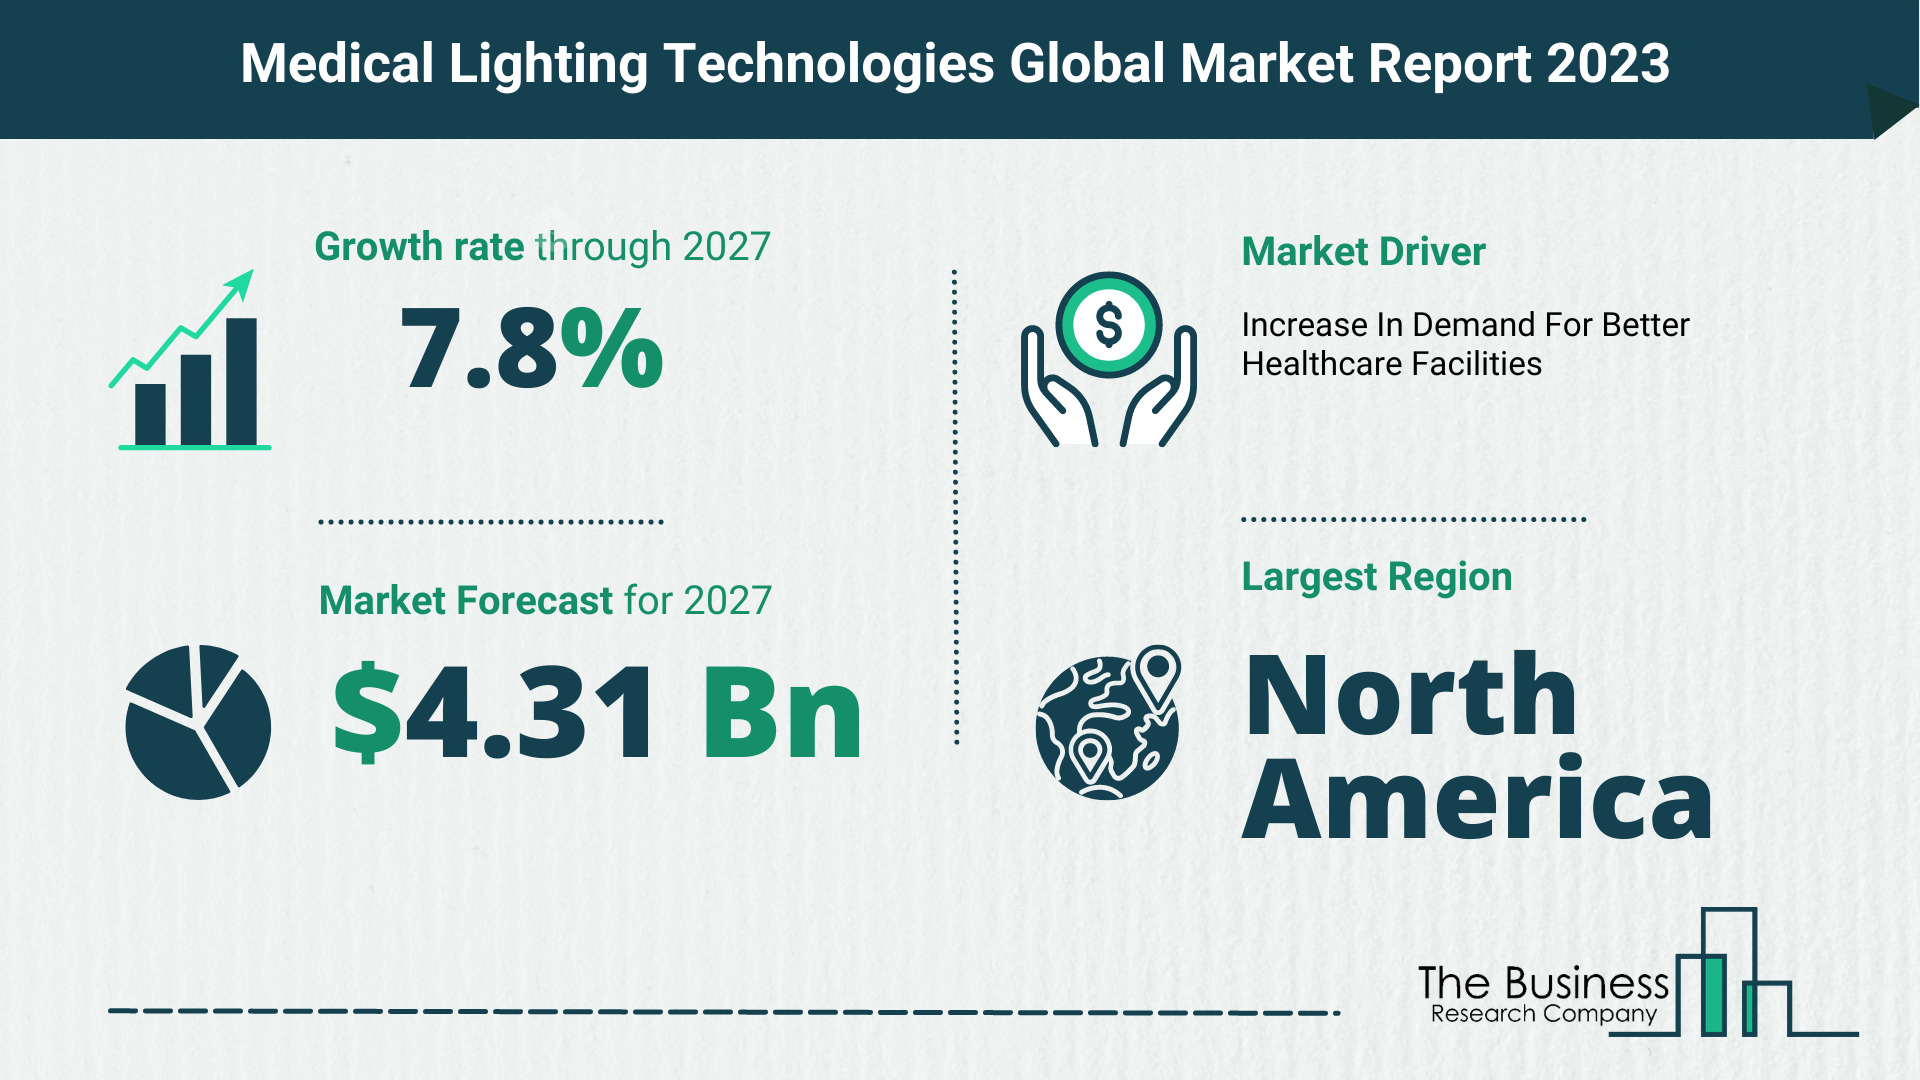 How Will The Medical Lighting Technologies Market Globally Expand In 2023?